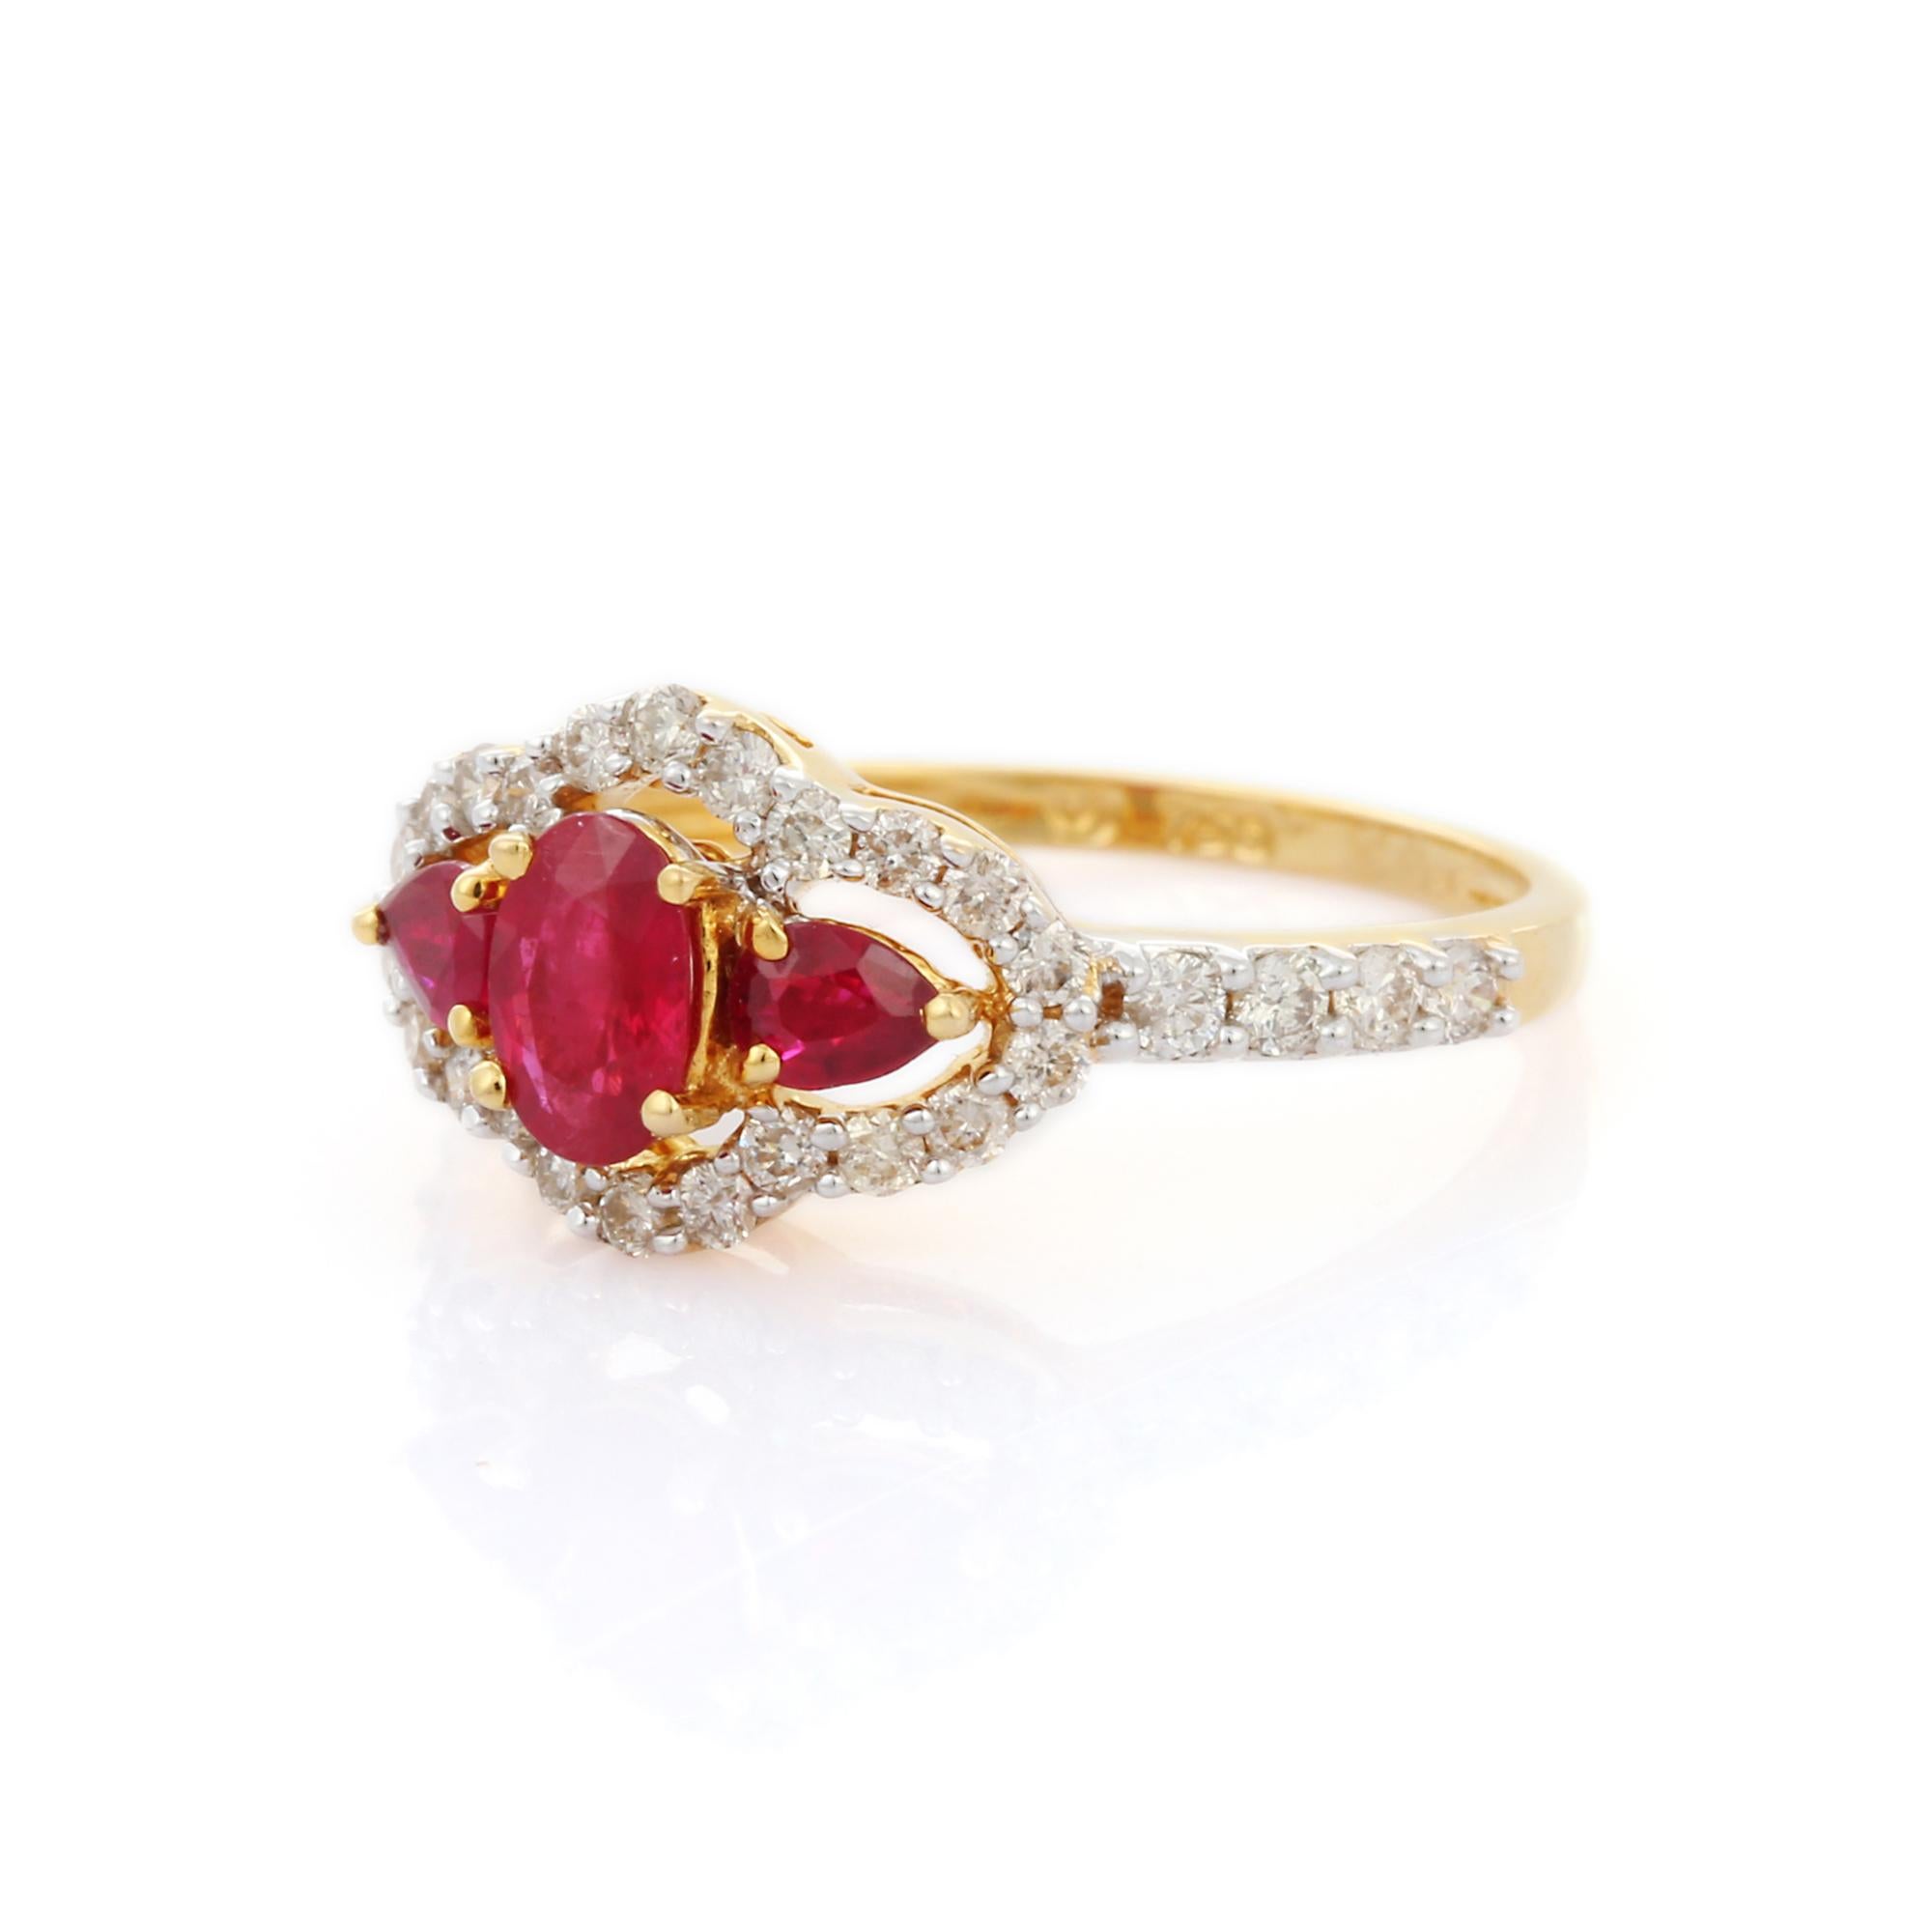 For Sale:  18K Yellow Gold Oval Cut Ruby Cluster Diamond Engagement Ring 3